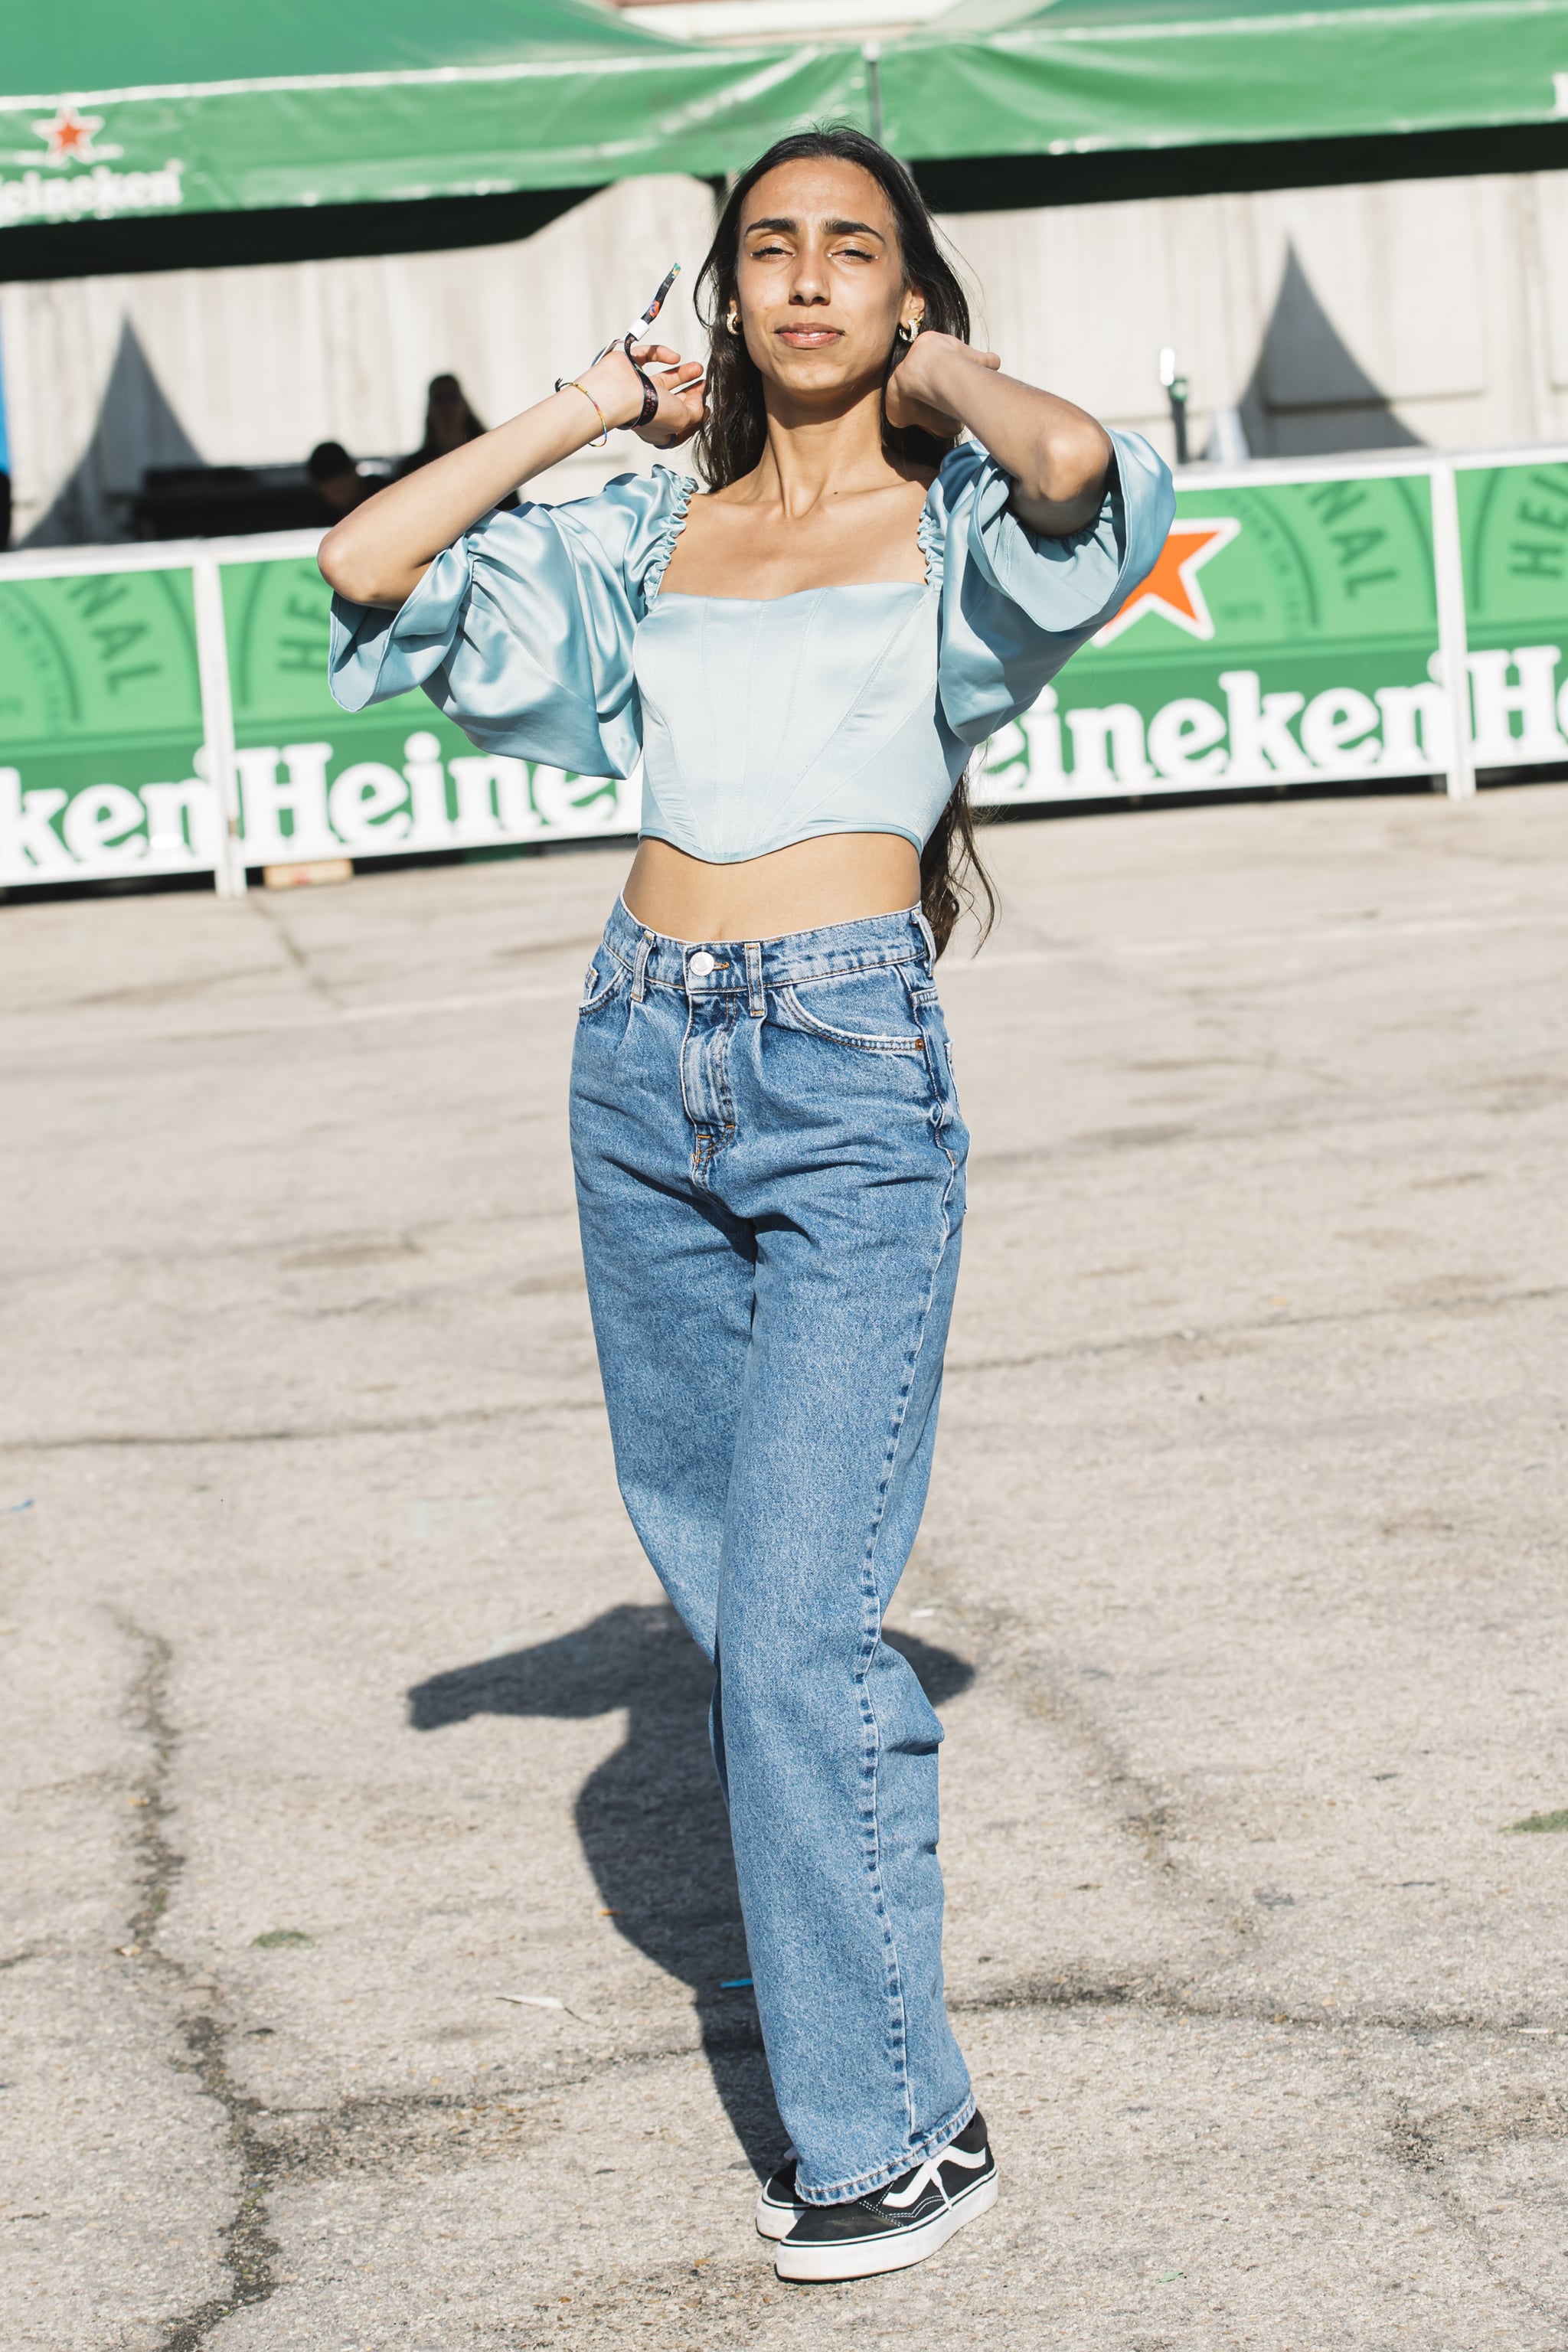 rukken etnisch Positief Festival Outfits | 29 Outfits Perfect For Music Festival Season This Summer  | POPSUGAR Fashion Photo 30